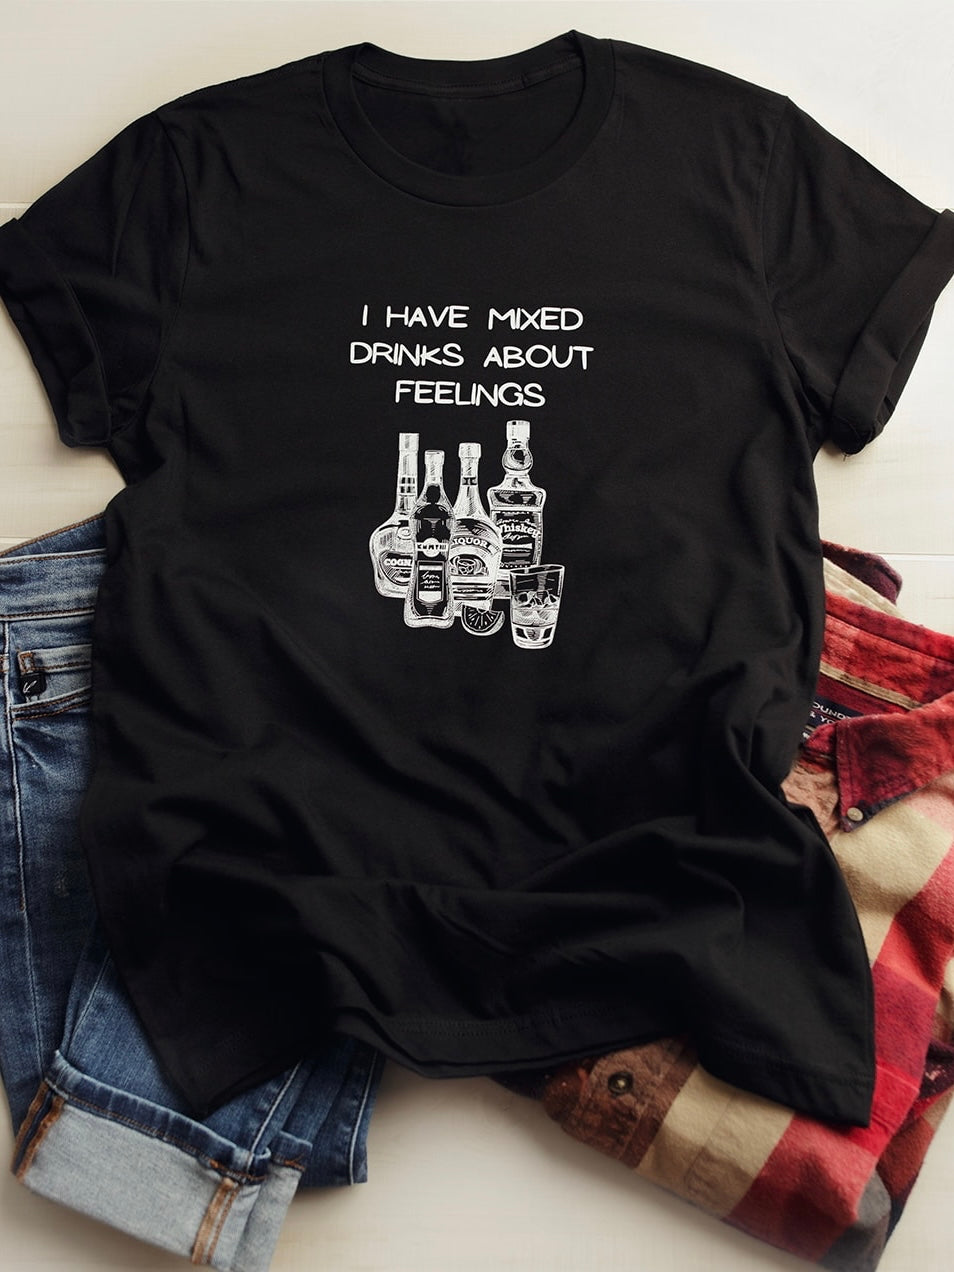 Black Bella Canvas Tee That Says I have Mixed Drinks About Feelings